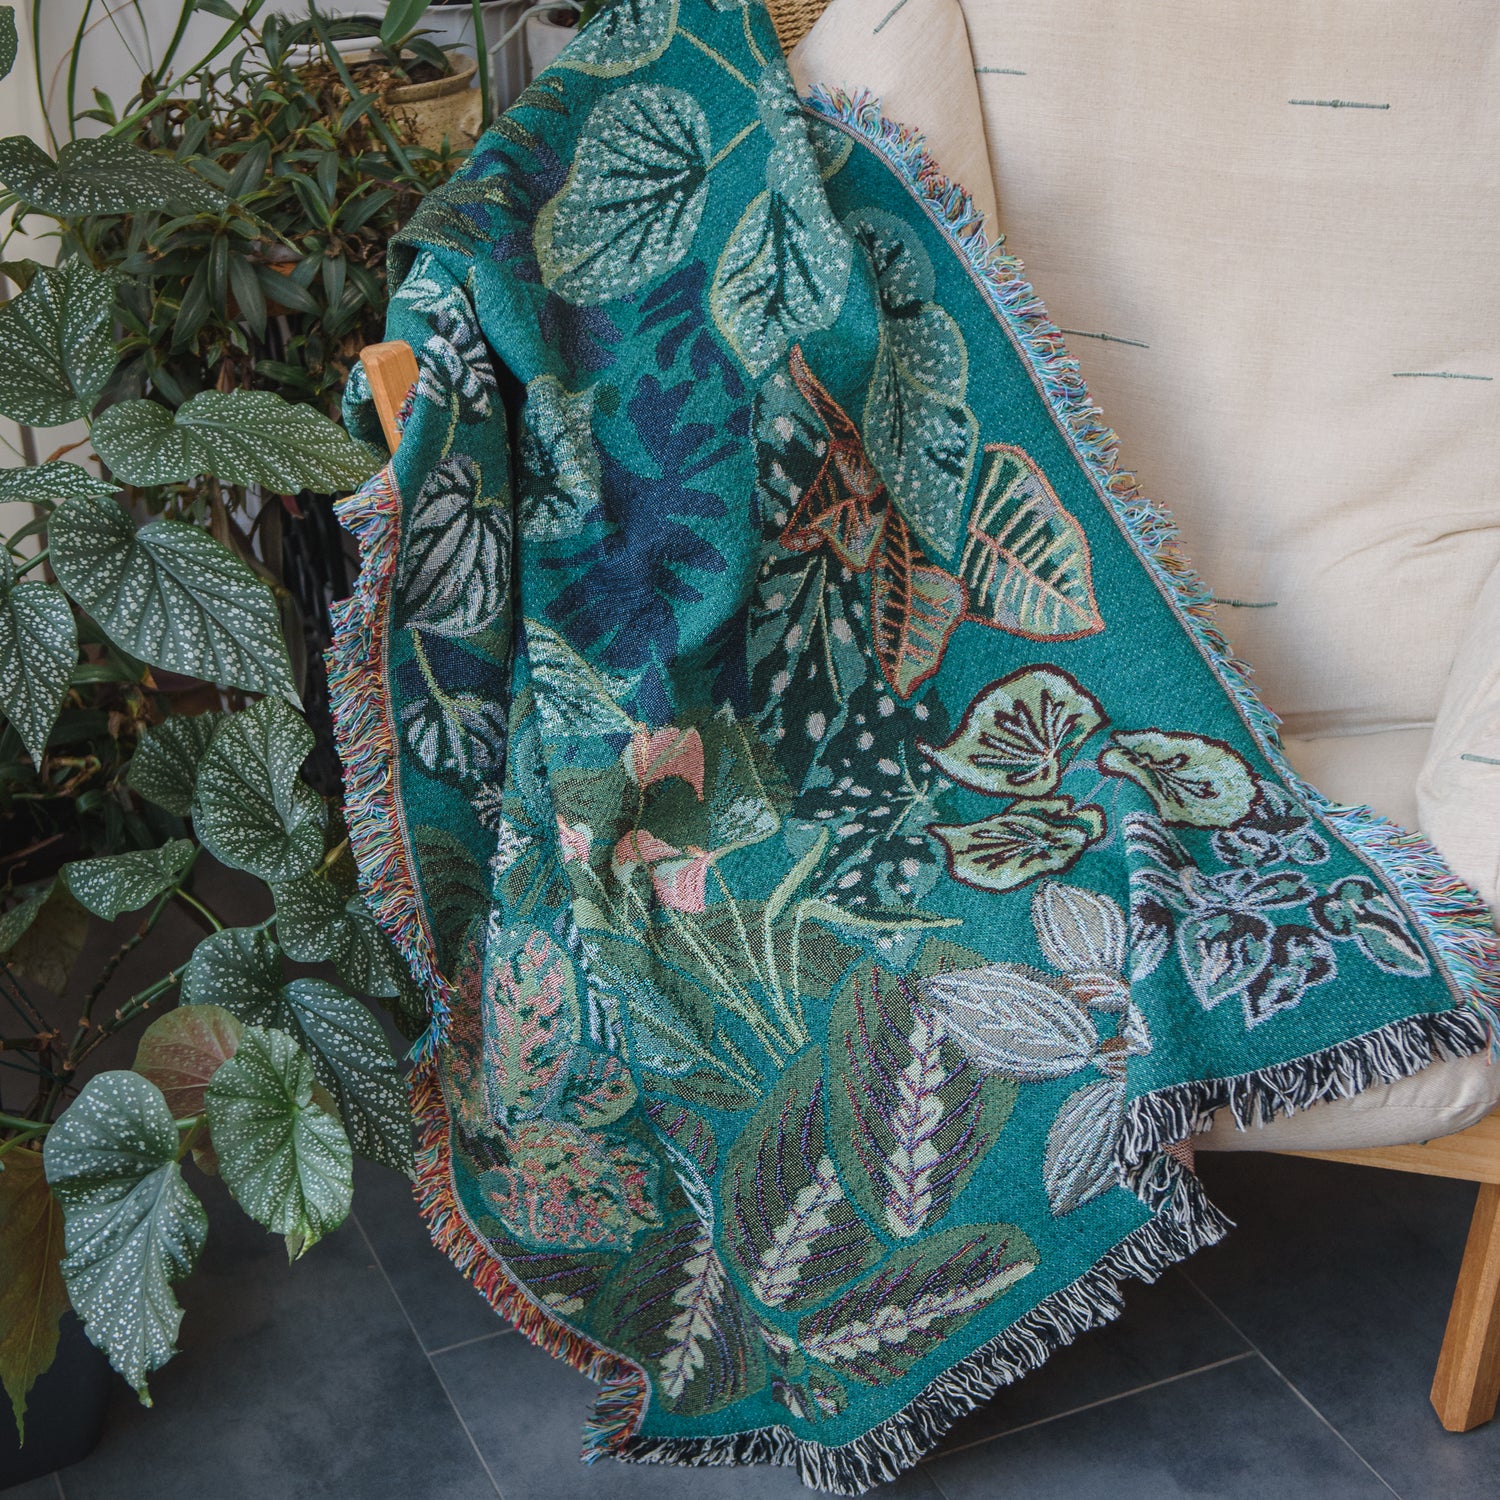 woven wrap blanket with fringe featuring lots of different houseplants draped over chair surrounded by houseplants